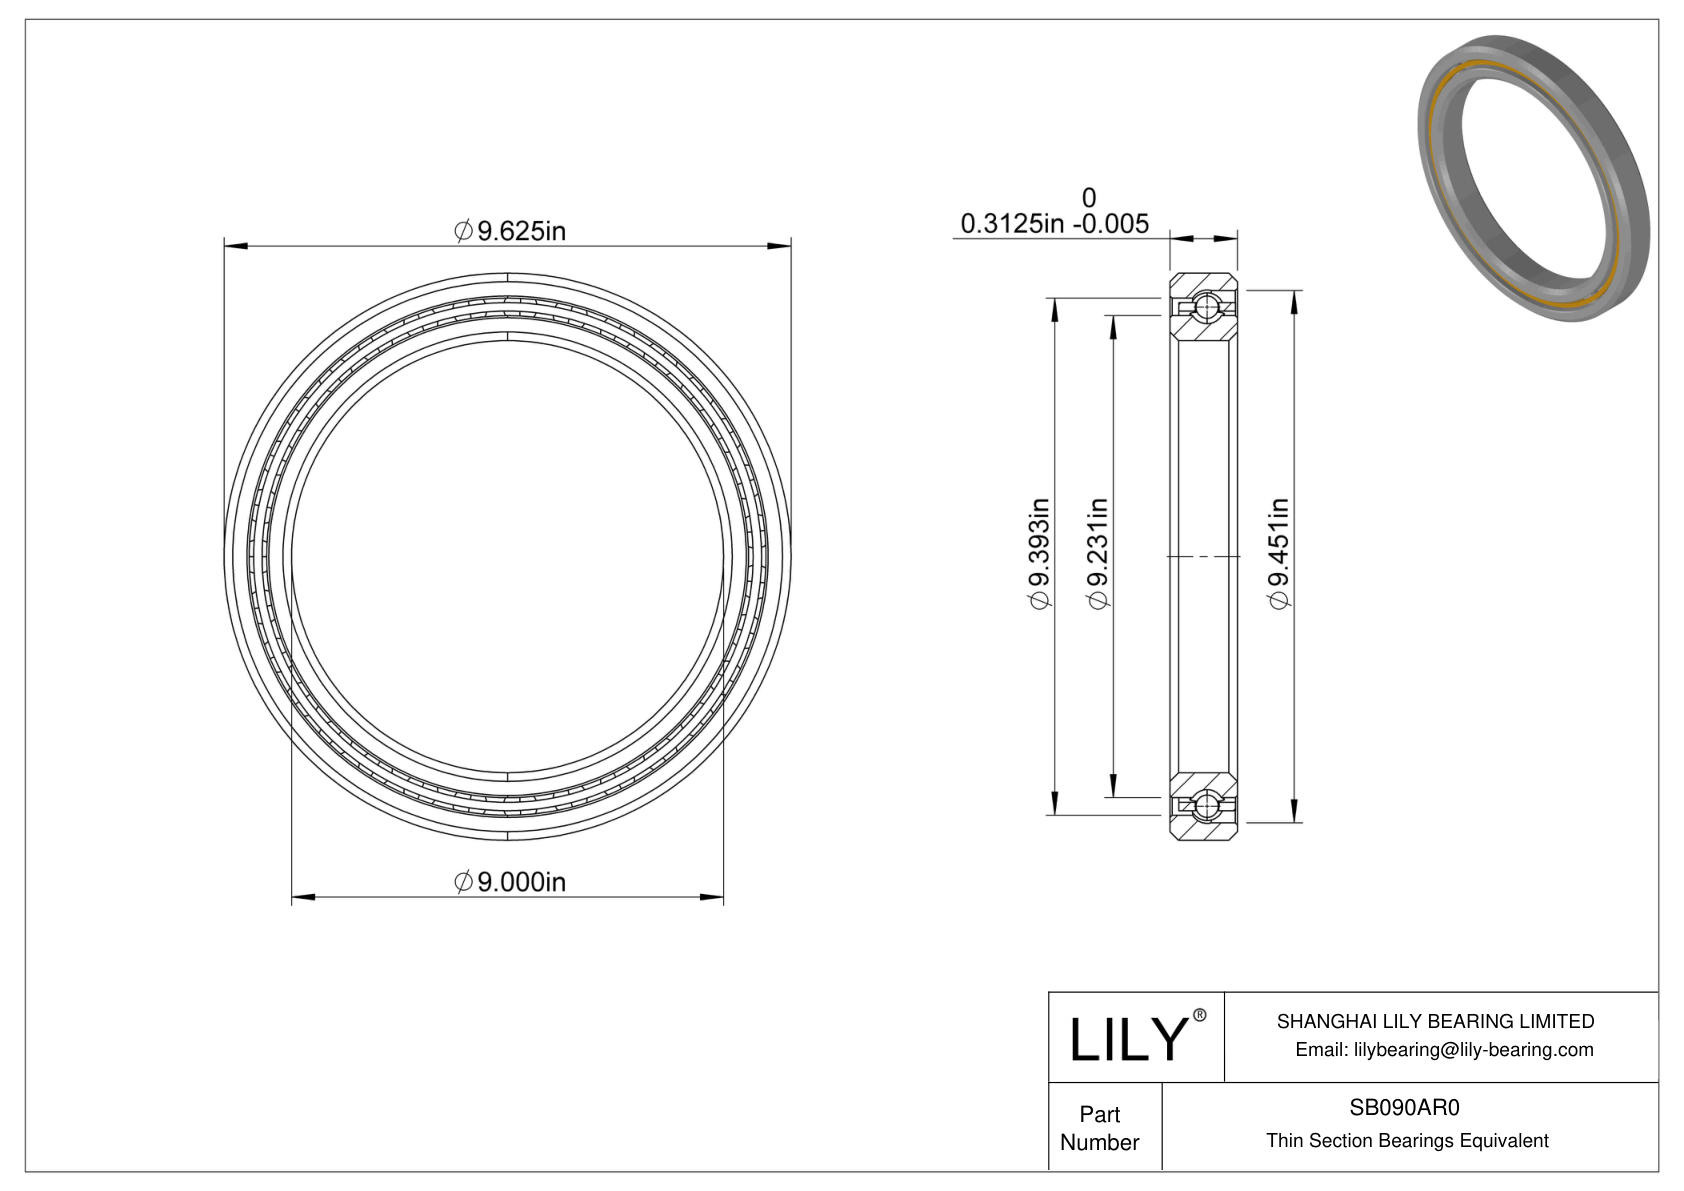 SB090AR0 Constant Section (CS) Bearings cad drawing